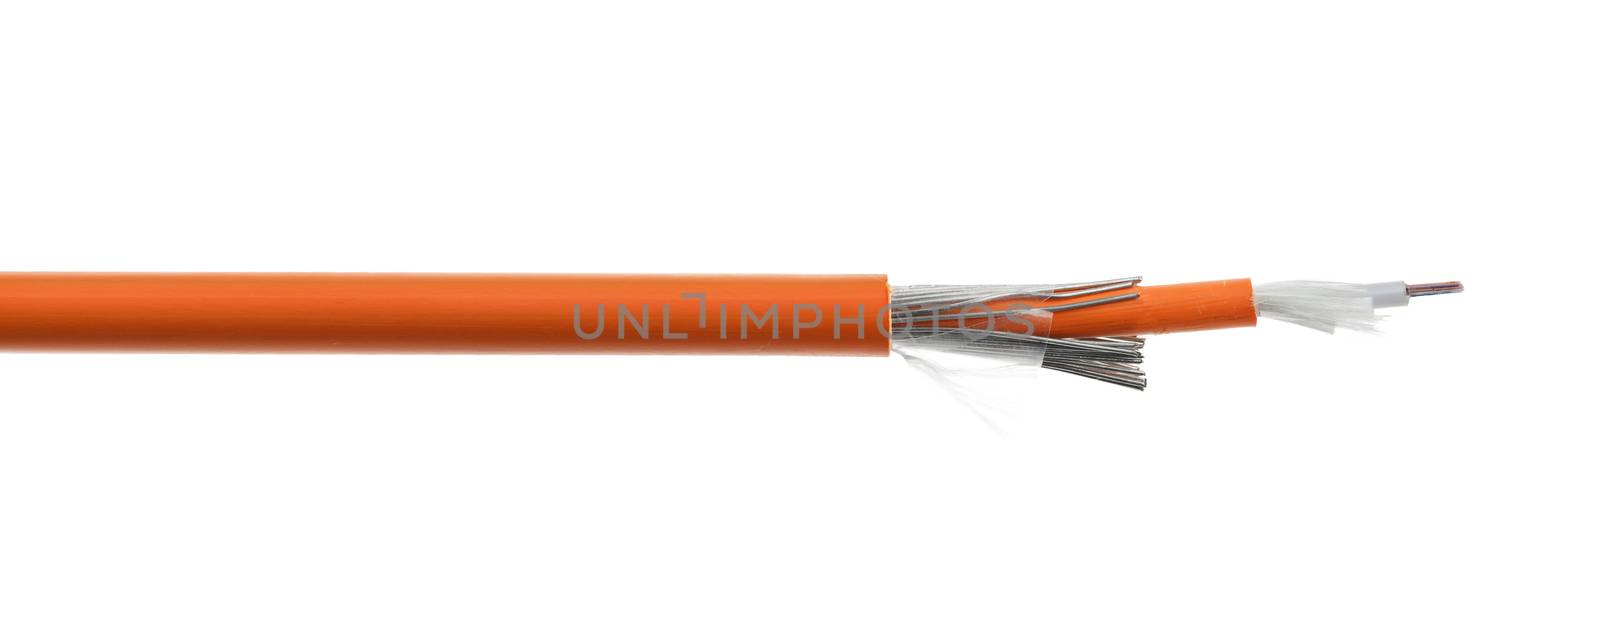 Steel rugged fiber optical cable isolated on white background. Loose tubes with optical fibres and central strenght member including waterblocking glass yarn and ripcord, multimode or single mode